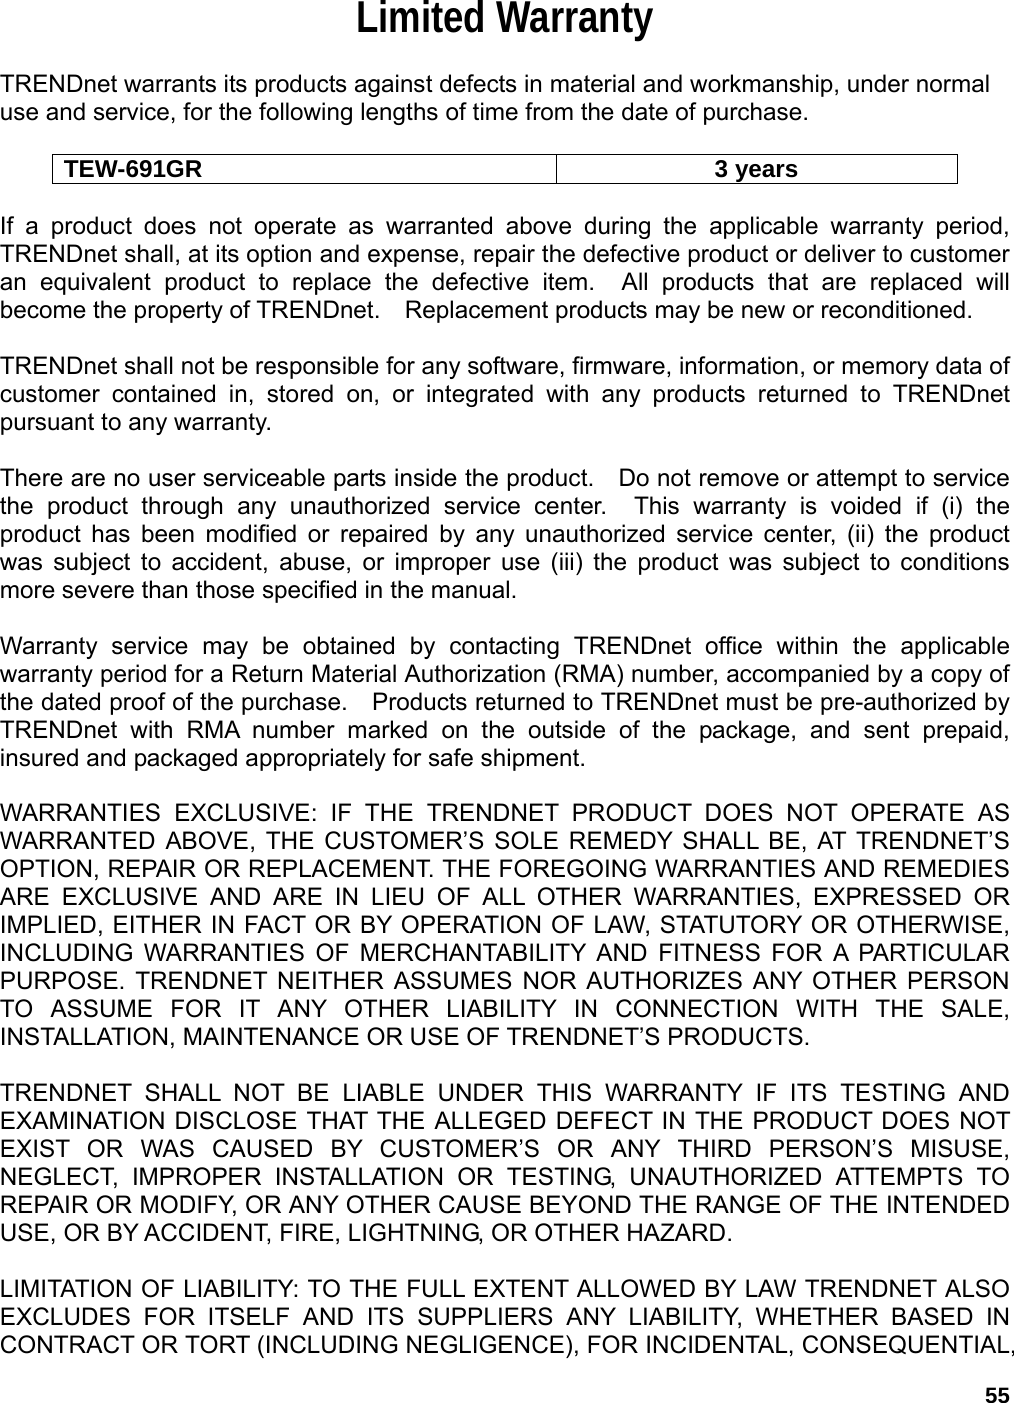 55 Limited Warranty  TRENDnet warrants its products against defects in material and workmanship, under normal use and service, for the following lengths of time from the date of purchase.      TEW-691GR 3 years  If a product does not operate as warranted above during the applicable warranty period, TRENDnet shall, at its option and expense, repair the defective product or deliver to customer an equivalent product to replace the defective item.  All products that are replaced will become the property of TRENDnet.    Replacement products may be new or reconditioned.  TRENDnet shall not be responsible for any software, firmware, information, or memory data of customer contained in, stored on, or integrated with any products returned to TRENDnet pursuant to any warranty.  There are no user serviceable parts inside the product.    Do not remove or attempt to service the product through any unauthorized service center.  This warranty is voided if (i) the product has been modified or repaired by any unauthorized service center, (ii) the product was subject to accident, abuse, or improper use (iii) the product was subject to conditions more severe than those specified in the manual.  Warranty service may be obtained by contacting TRENDnet office within the applicable warranty period for a Return Material Authorization (RMA) number, accompanied by a copy of the dated proof of the purchase.    Products returned to TRENDnet must be pre-authorized by TRENDnet with RMA number marked on the outside of the package, and sent prepaid, insured and packaged appropriately for safe shipment.      WARRANTIES EXCLUSIVE: IF THE TRENDNET PRODUCT DOES NOT OPERATE AS WARRANTED ABOVE, THE CUSTOMER’S SOLE REMEDY SHALL BE, AT TRENDNET’S OPTION, REPAIR OR REPLACEMENT. THE FOREGOING WARRANTIES AND REMEDIES ARE EXCLUSIVE AND ARE IN LIEU OF ALL OTHER WARRANTIES, EXPRESSED OR IMPLIED, EITHER IN FACT OR BY OPERATION OF LAW, STATUTORY OR OTHERWISE, INCLUDING WARRANTIES OF MERCHANTABILITY AND FITNESS FOR A PARTICULAR PURPOSE. TRENDNET NEITHER ASSUMES NOR AUTHORIZES ANY OTHER PERSON TO ASSUME FOR IT ANY OTHER LIABILITY IN CONNECTION WITH THE SALE, INSTALLATION, MAINTENANCE OR USE OF TRENDNET’S PRODUCTS.  TRENDNET SHALL NOT BE LIABLE UNDER THIS WARRANTY IF ITS TESTING AND EXAMINATION DISCLOSE THAT THE ALLEGED DEFECT IN THE PRODUCT DOES NOT EXIST OR WAS CAUSED BY CUSTOMER’S OR ANY THIRD PERSON’S MISUSE, NEGLECT, IMPROPER INSTALLATION OR TESTING, UNAUTHORIZED ATTEMPTS TO REPAIR OR MODIFY, OR ANY OTHER CAUSE BEYOND THE RANGE OF THE INTENDED USE, OR BY ACCIDENT, FIRE, LIGHTNING, OR OTHER HAZARD.  LIMITATION OF LIABILITY: TO THE FULL EXTENT ALLOWED BY LAW TRENDNET ALSO EXCLUDES FOR ITSELF AND ITS SUPPLIERS ANY LIABILITY, WHETHER BASED IN CONTRACT OR TORT (INCLUDING NEGLIGENCE), FOR INCIDENTAL, CONSEQUENTIAL, 